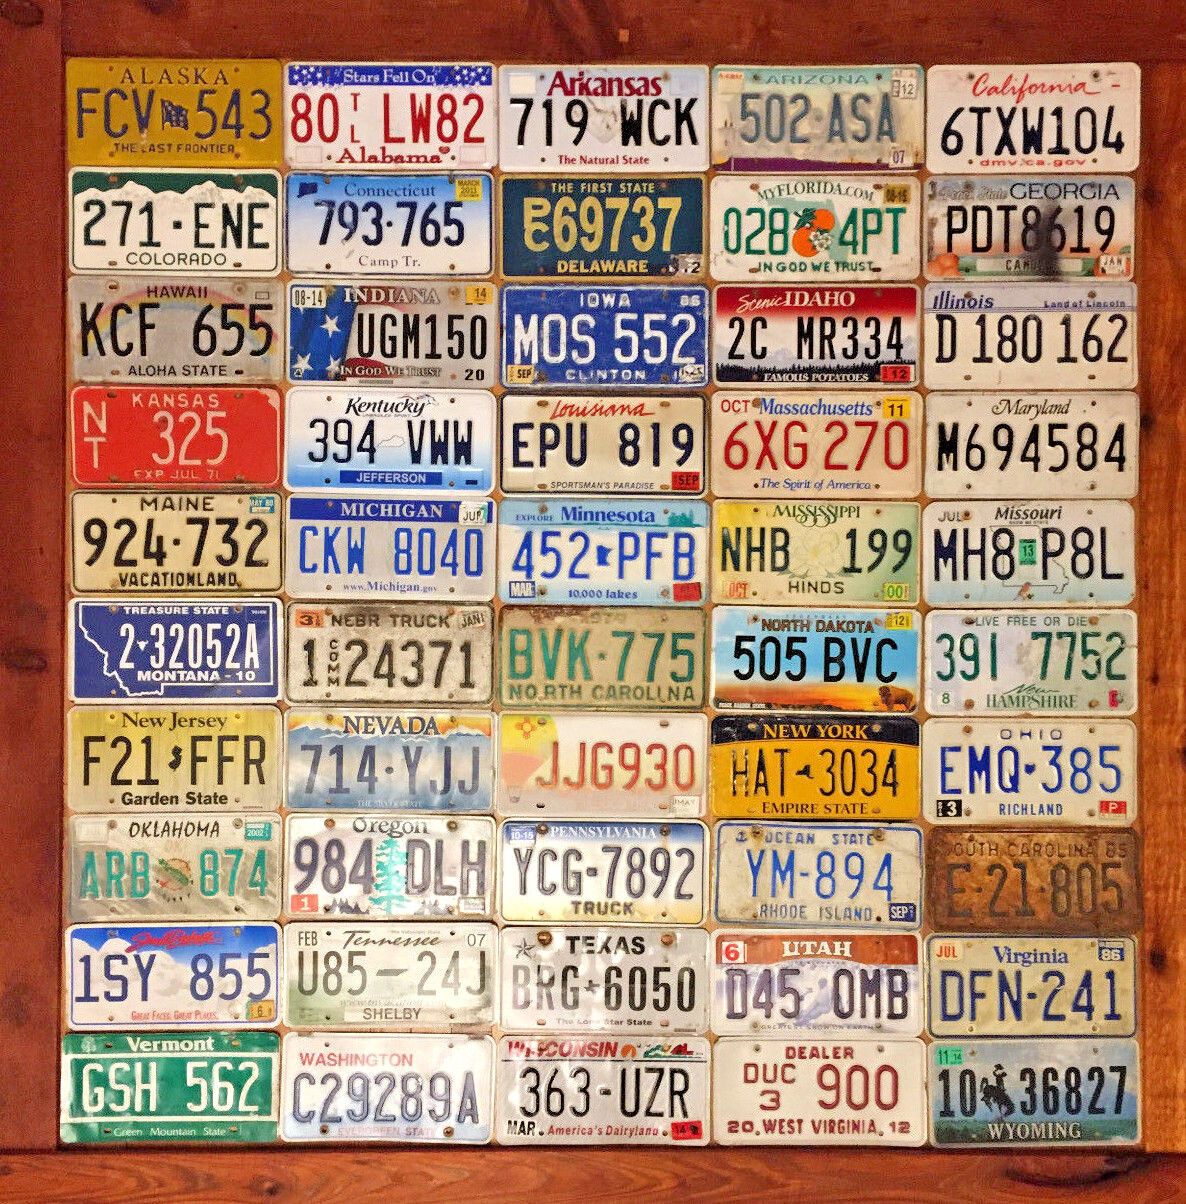 Full 50 State Set of United States License Plates in Poor Condition